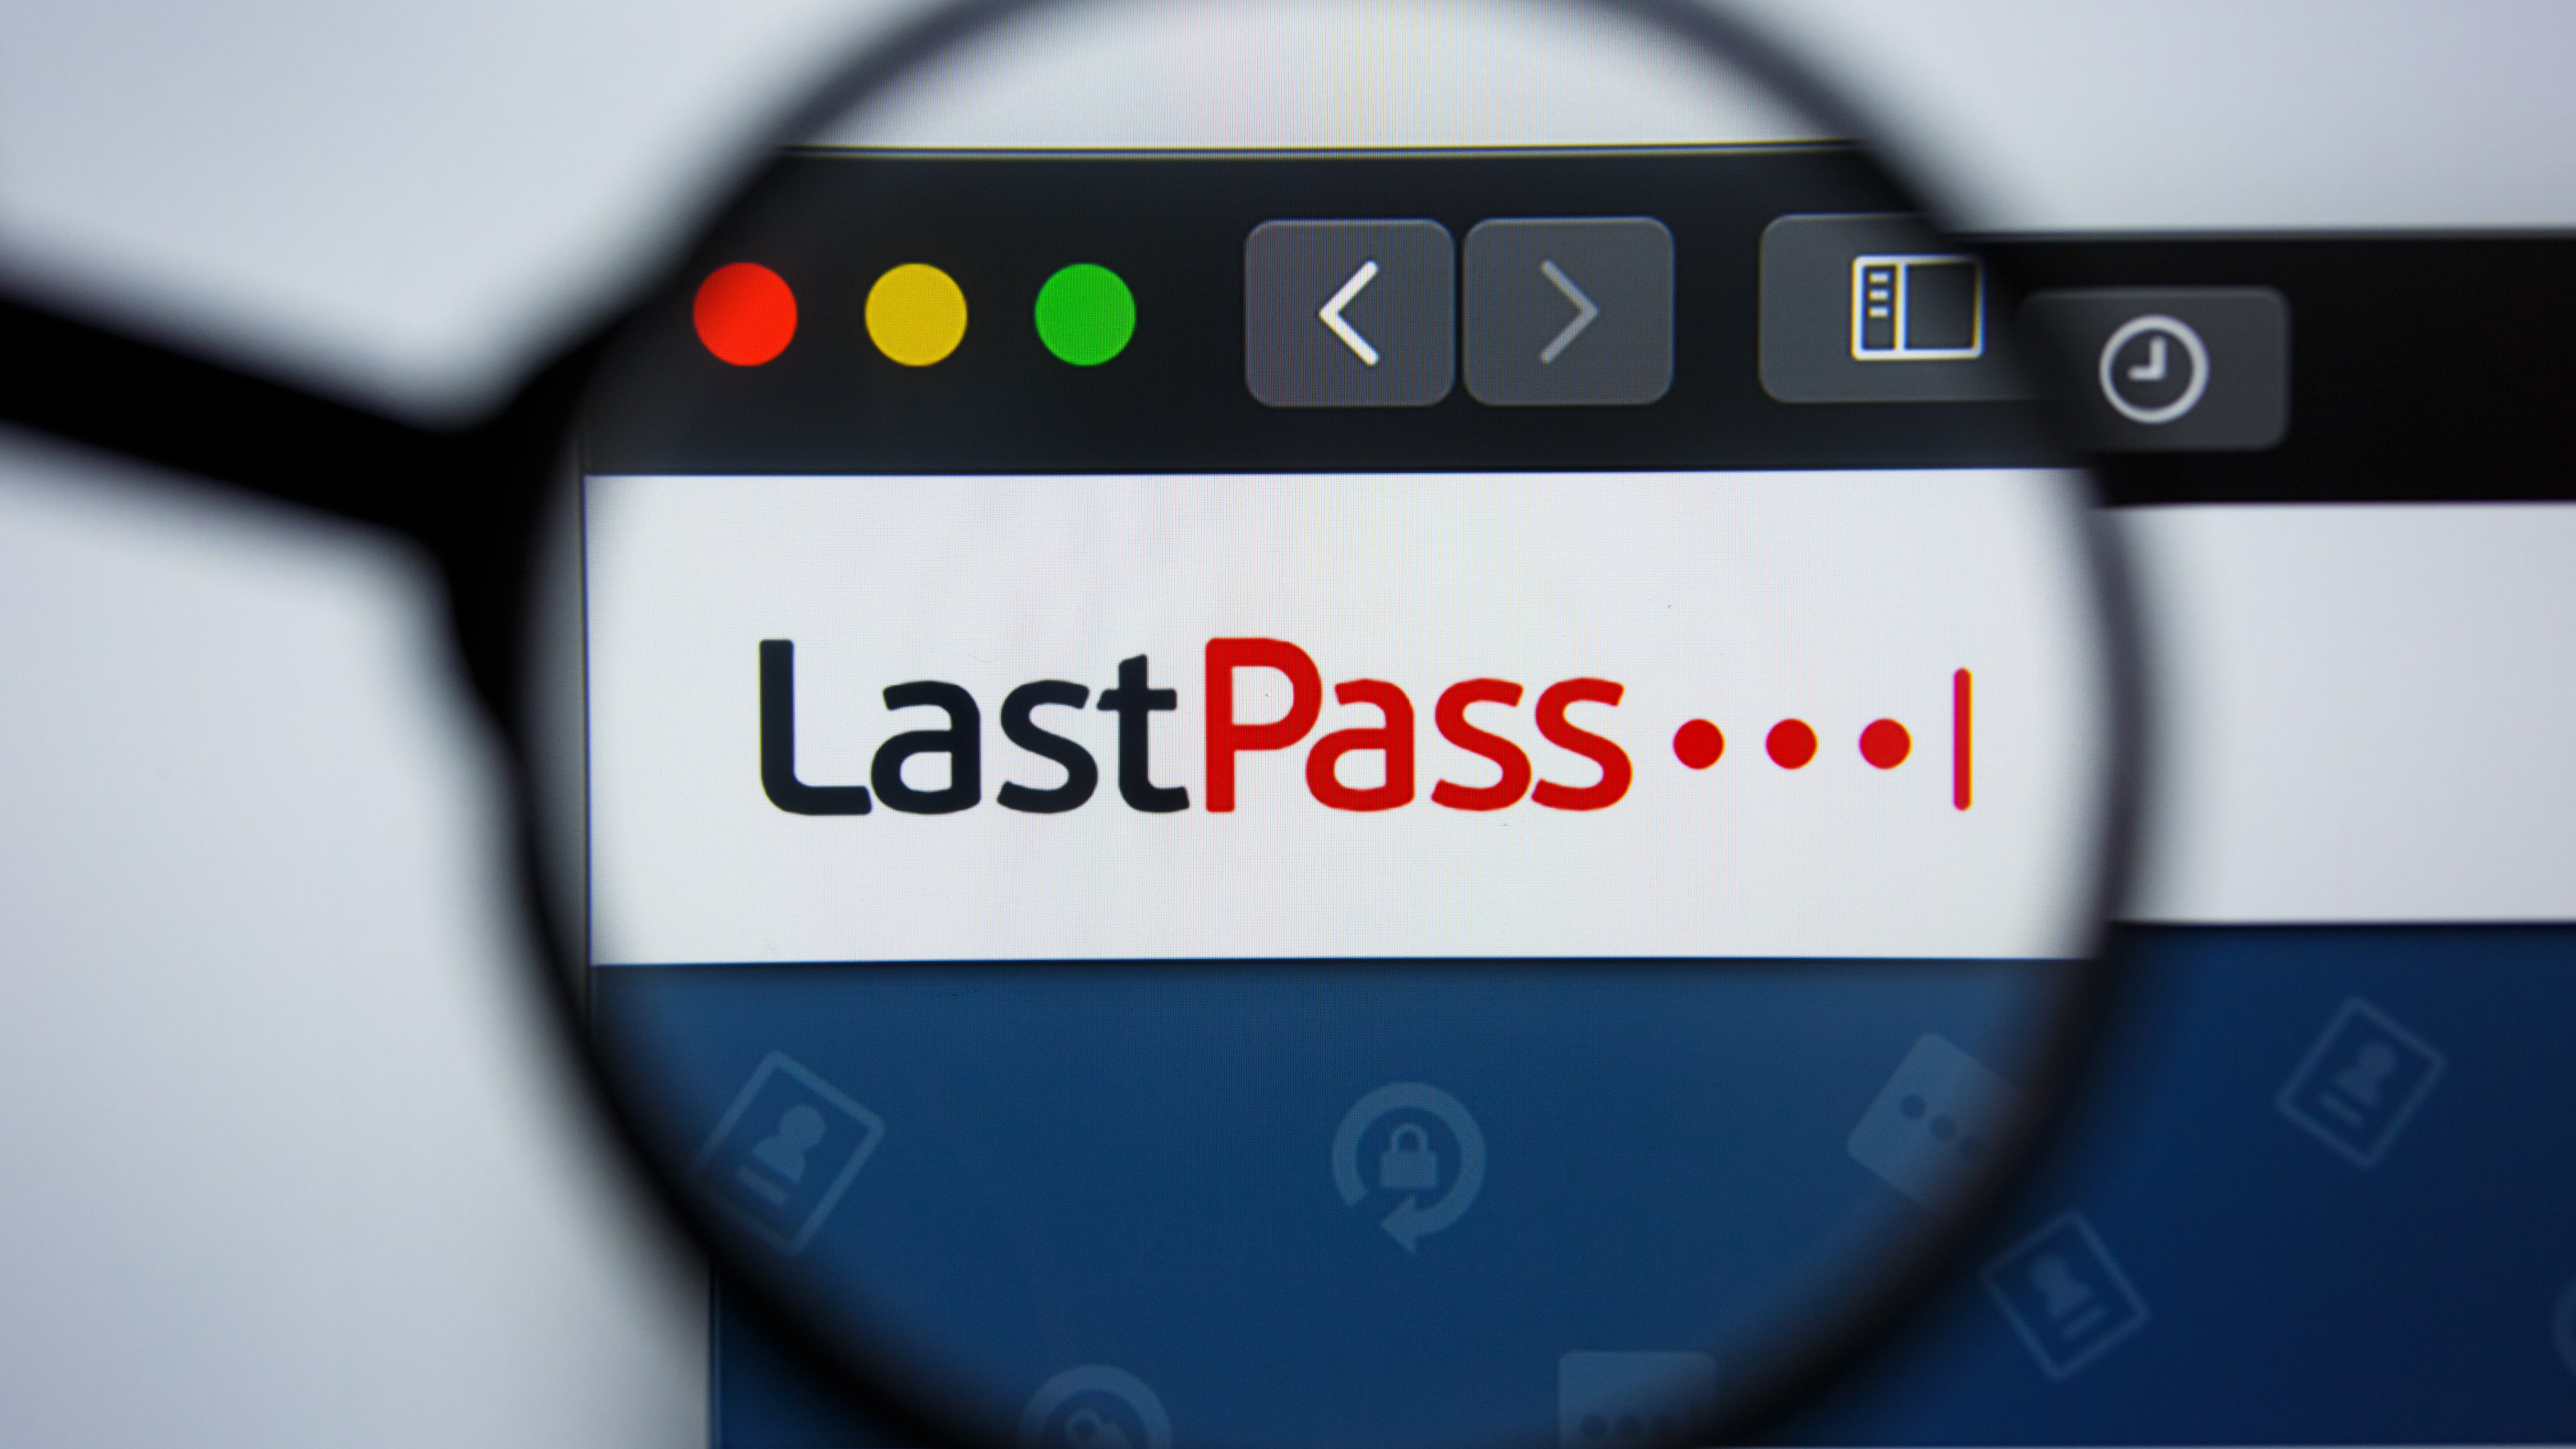 To Avoid A Security Bug, Make Sure You’re Running The Latest Version Of The LastPass Extension